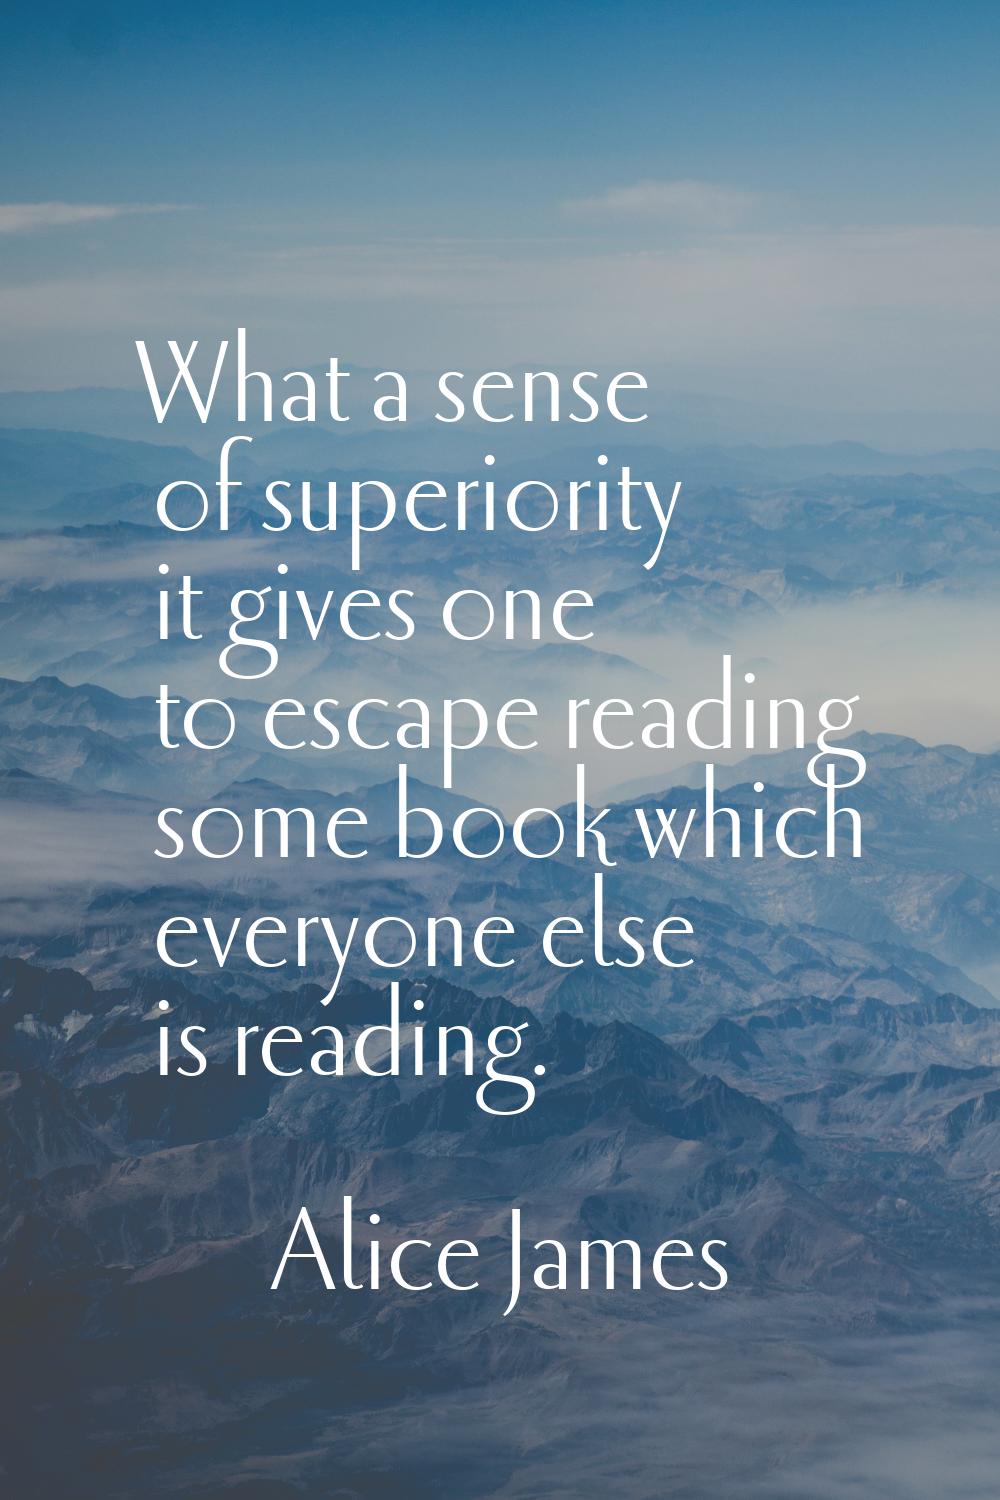 What a sense of superiority it gives one to escape reading some book which everyone else is reading